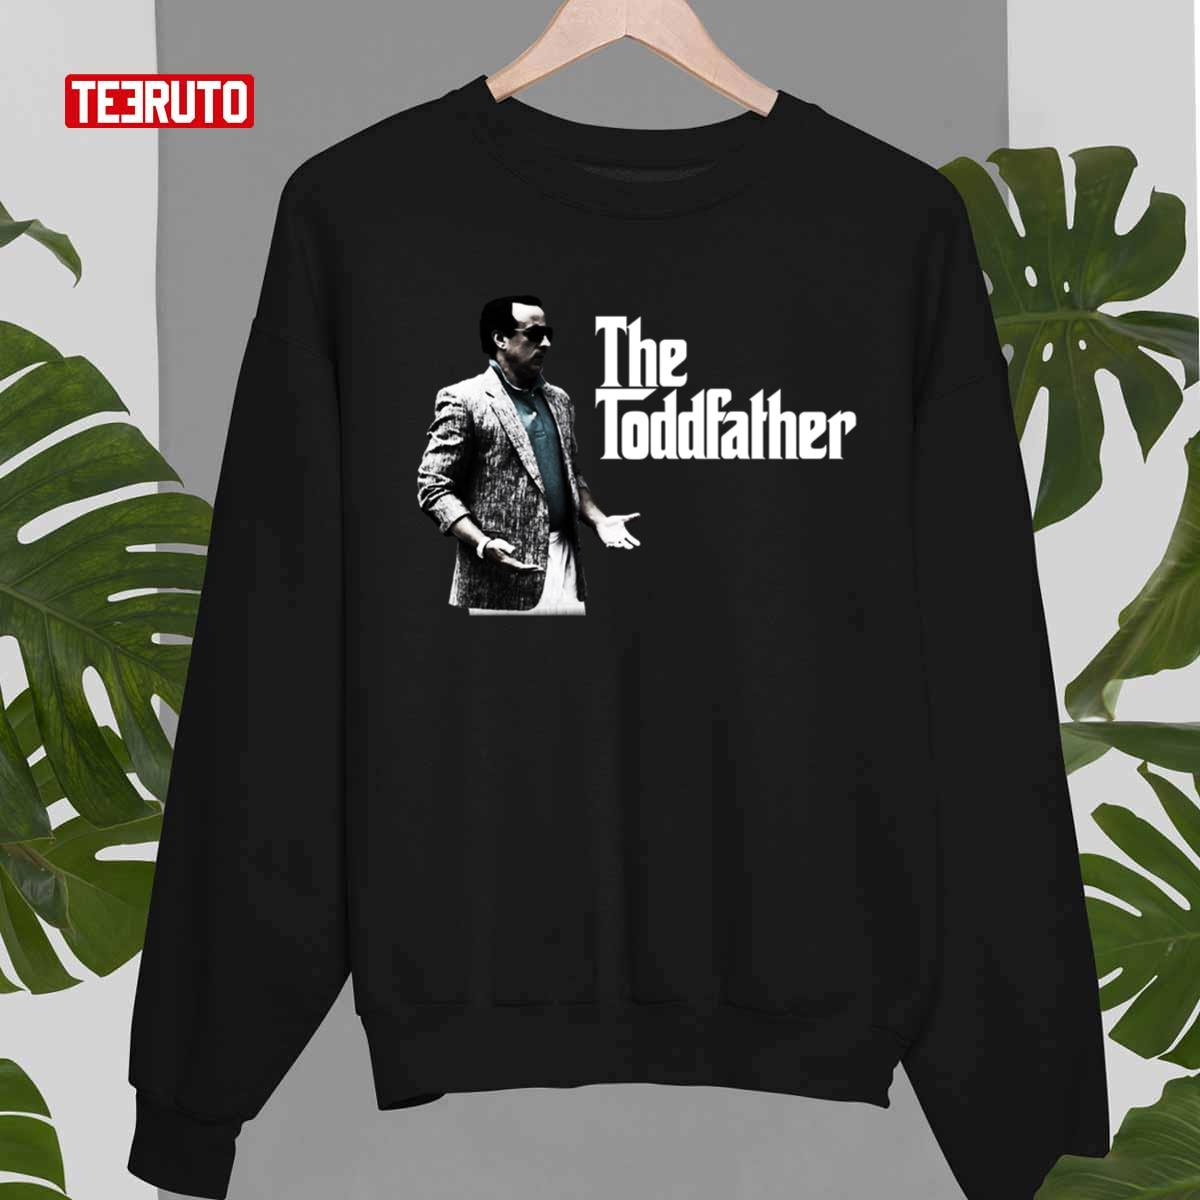 The Toddfather Unisex T-Shirt - Teeruto